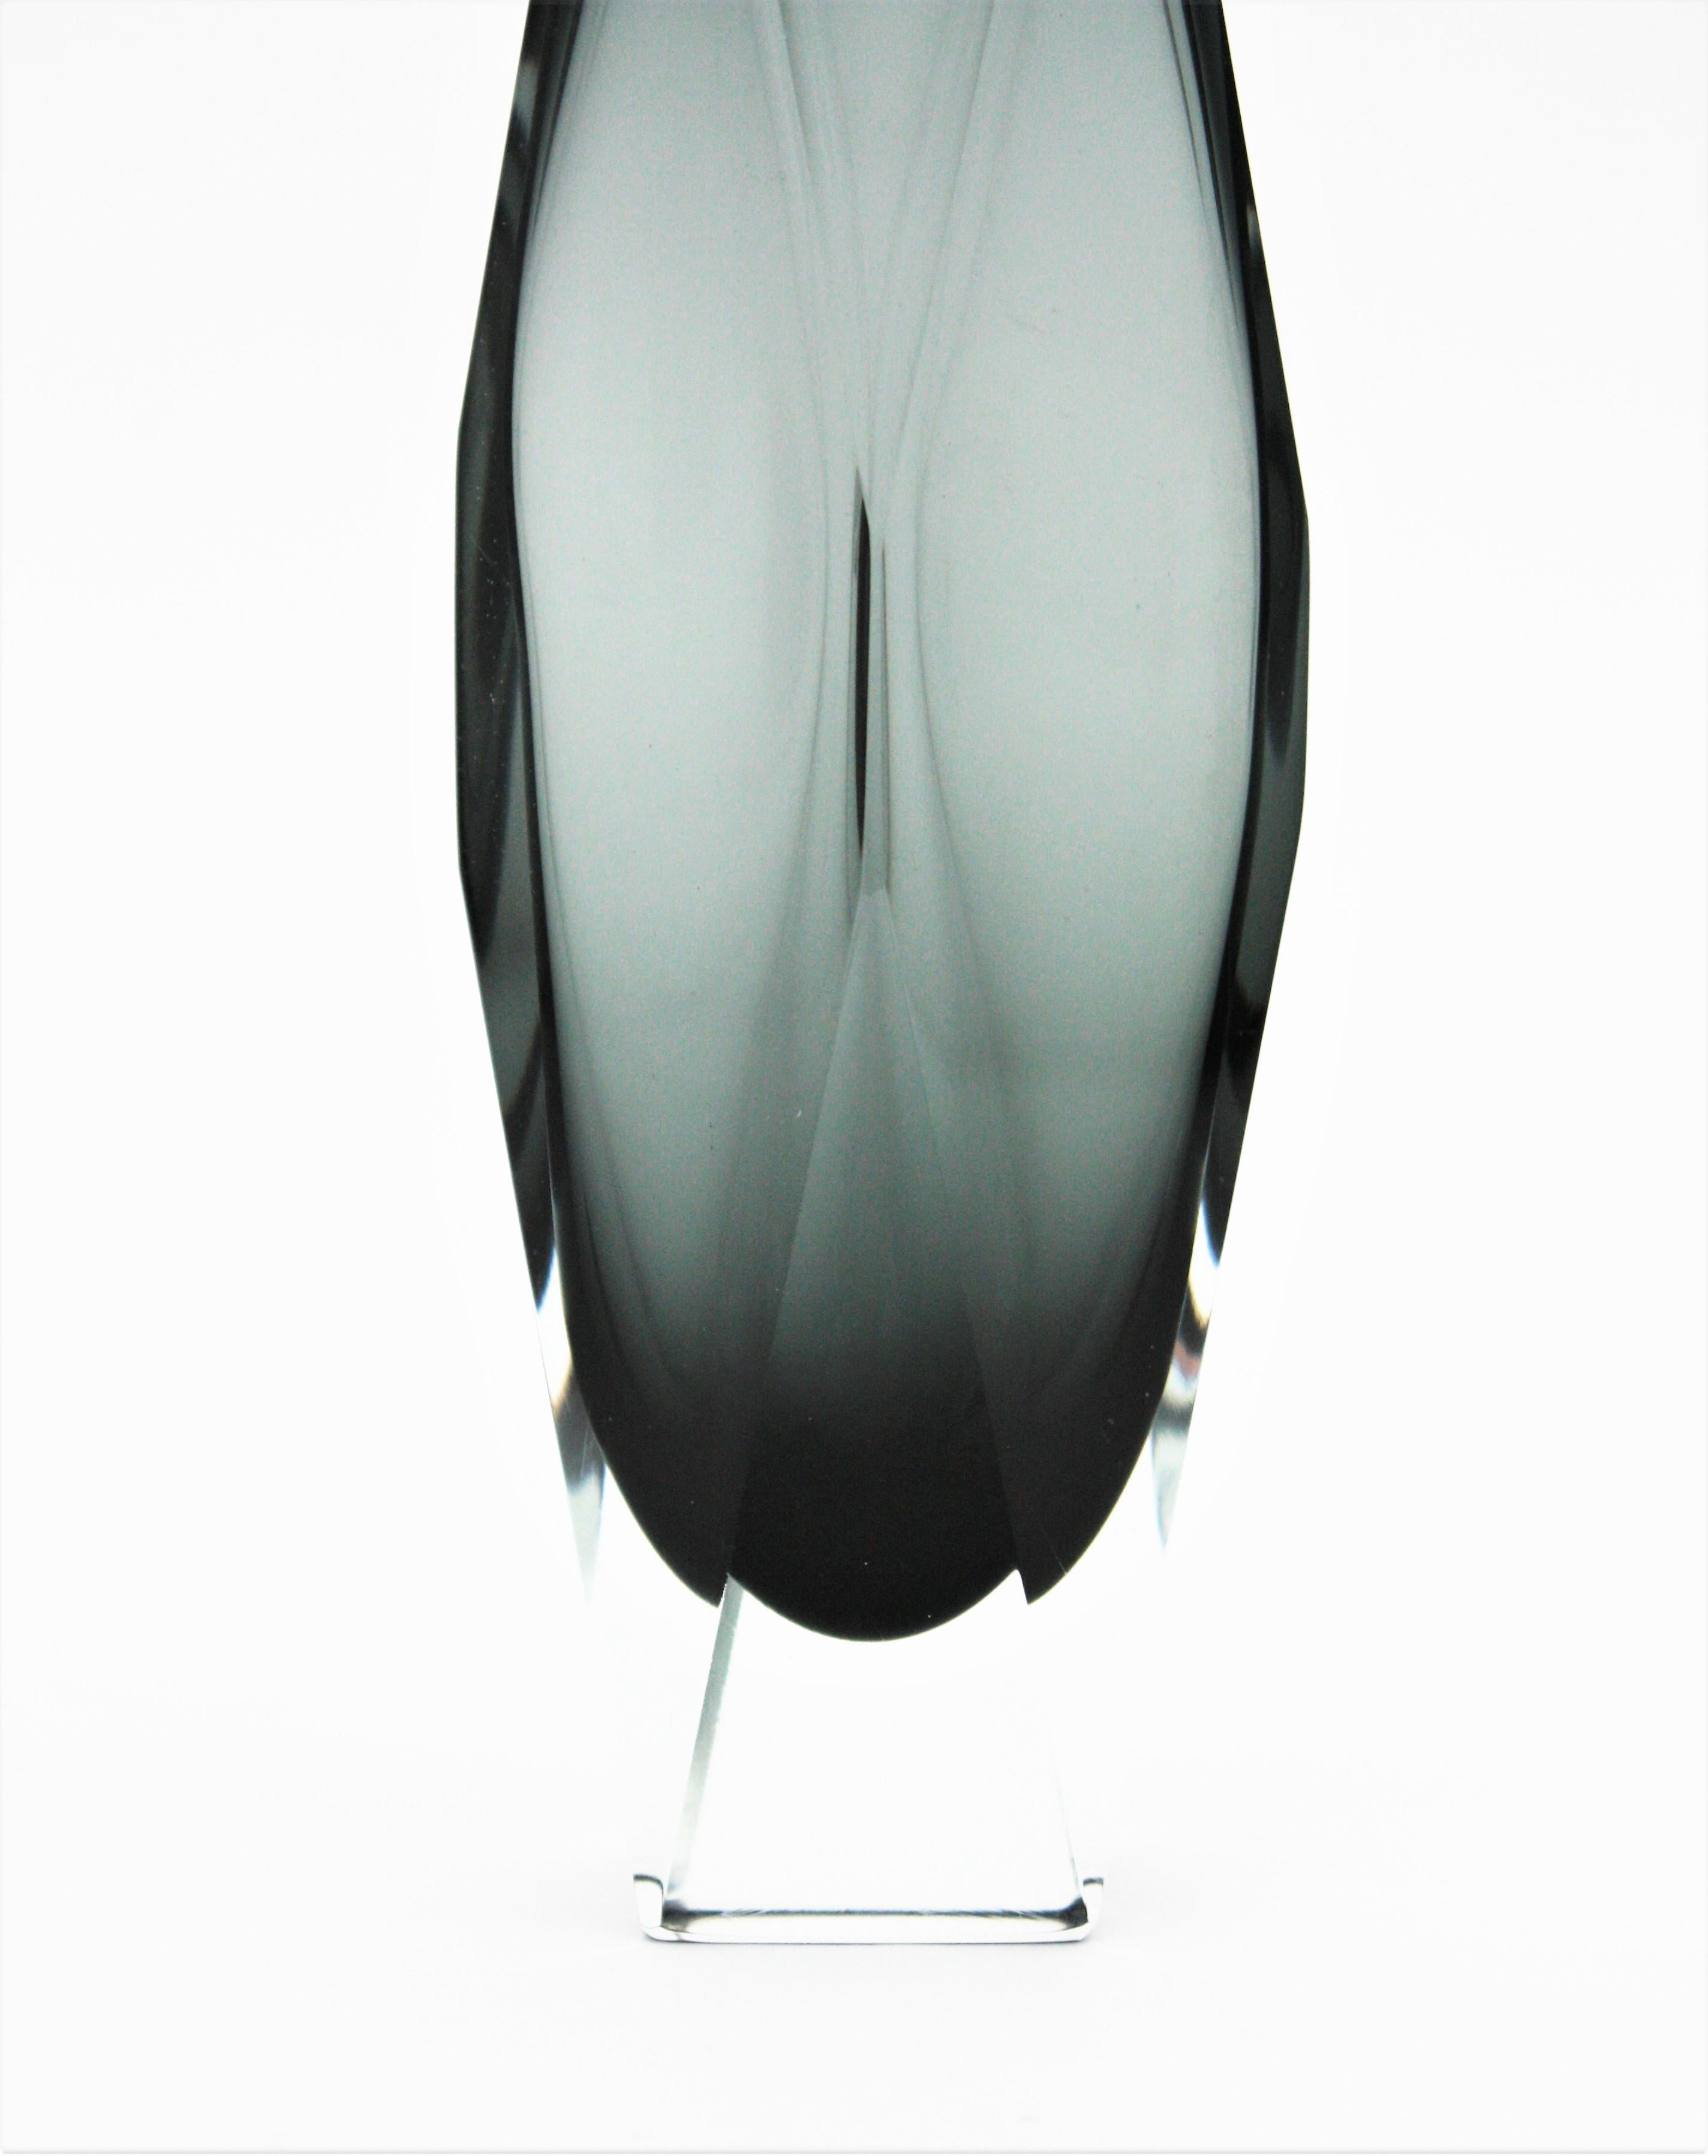 Mandruzzato Murano Sommerso Smoked Grey and Clear Faceted Art Glass Vase 2